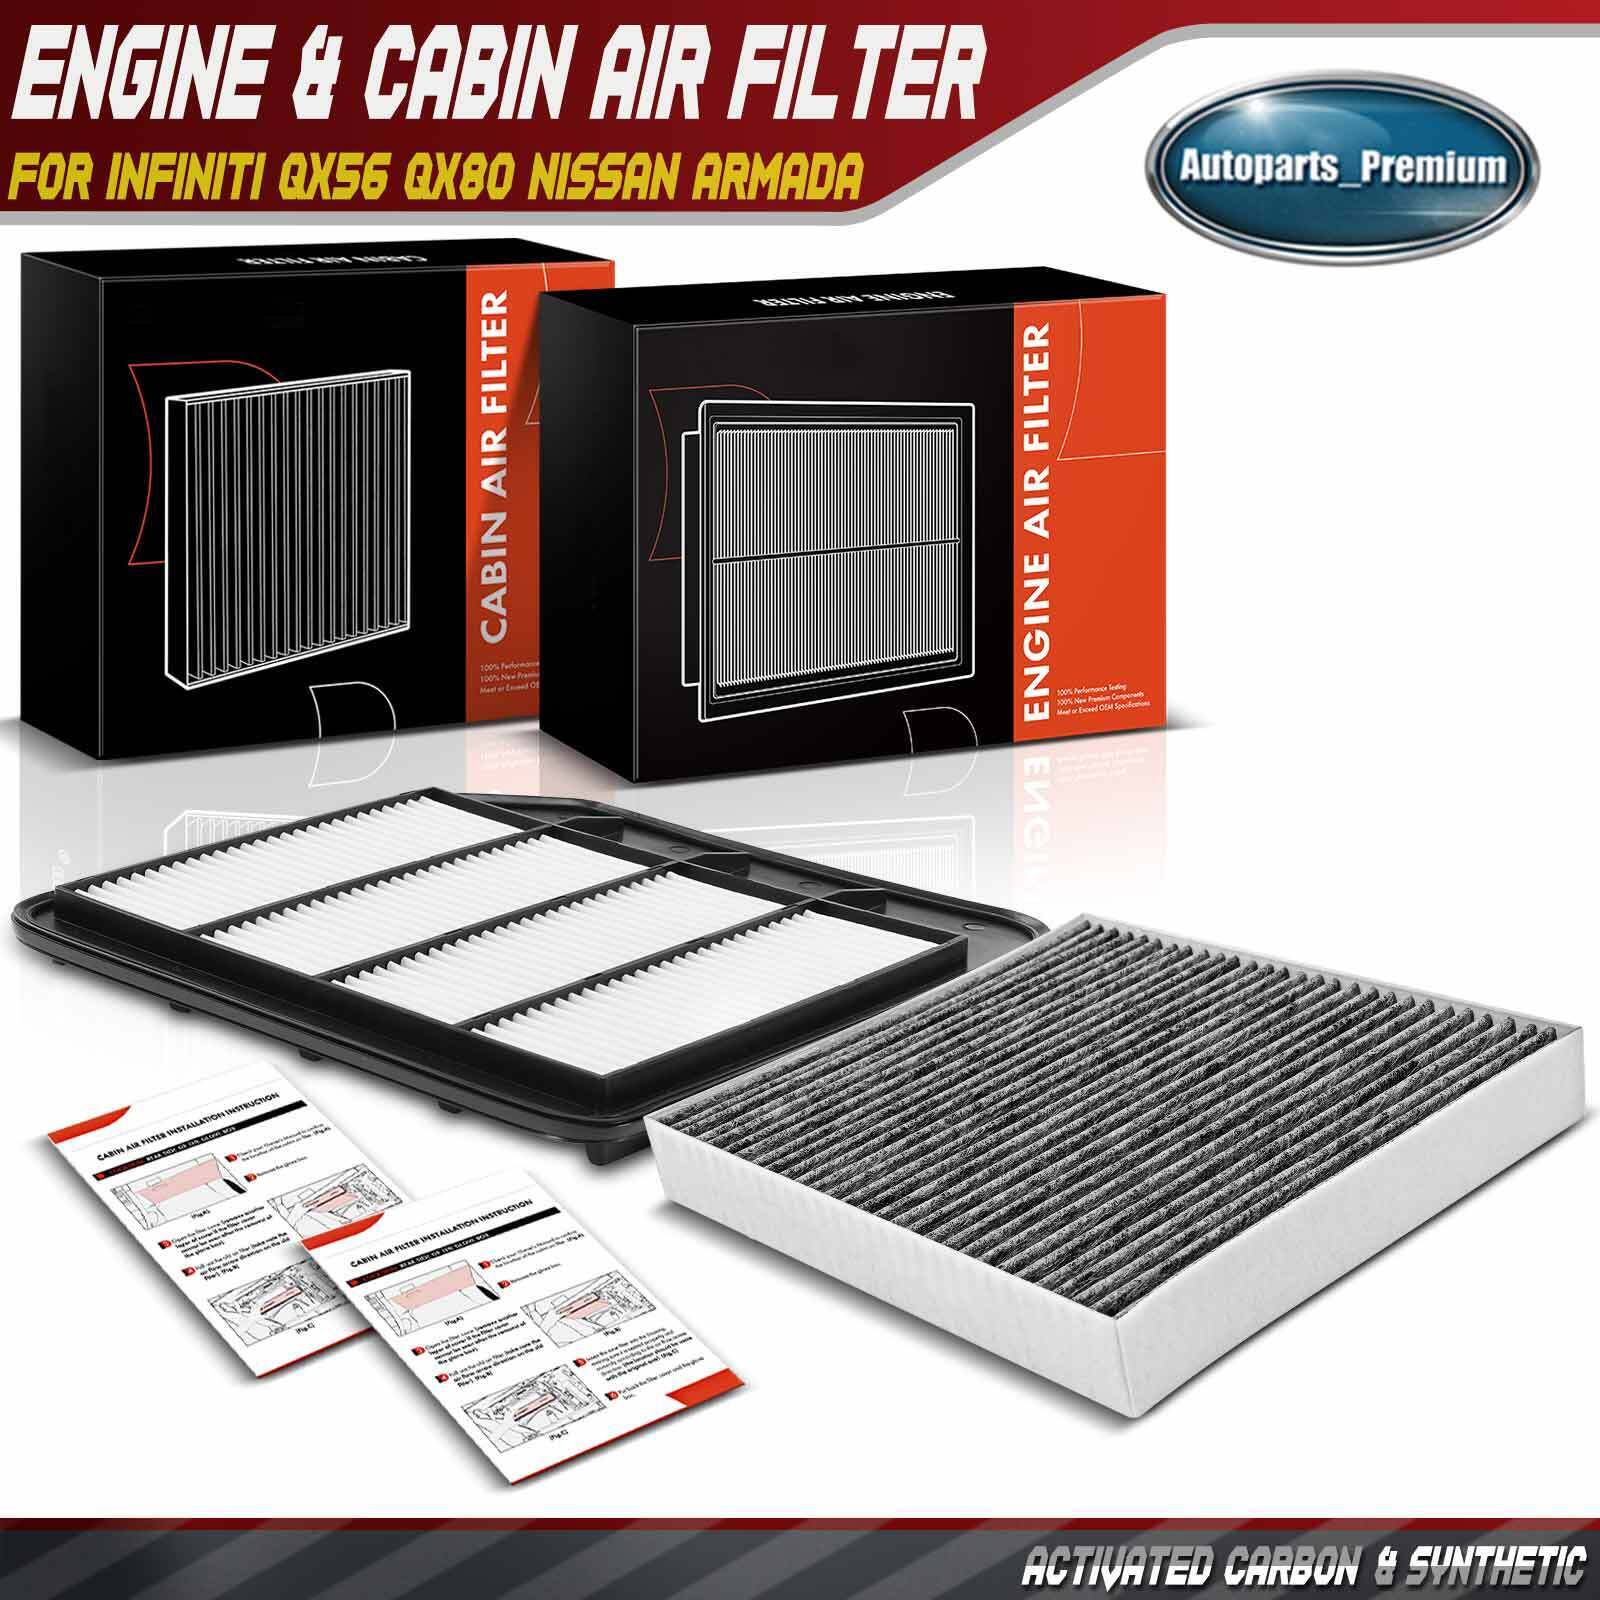 1x Engine & 1x Activated Carbon Cabin Air Filter for INFINITI QX56 Nissan Armada